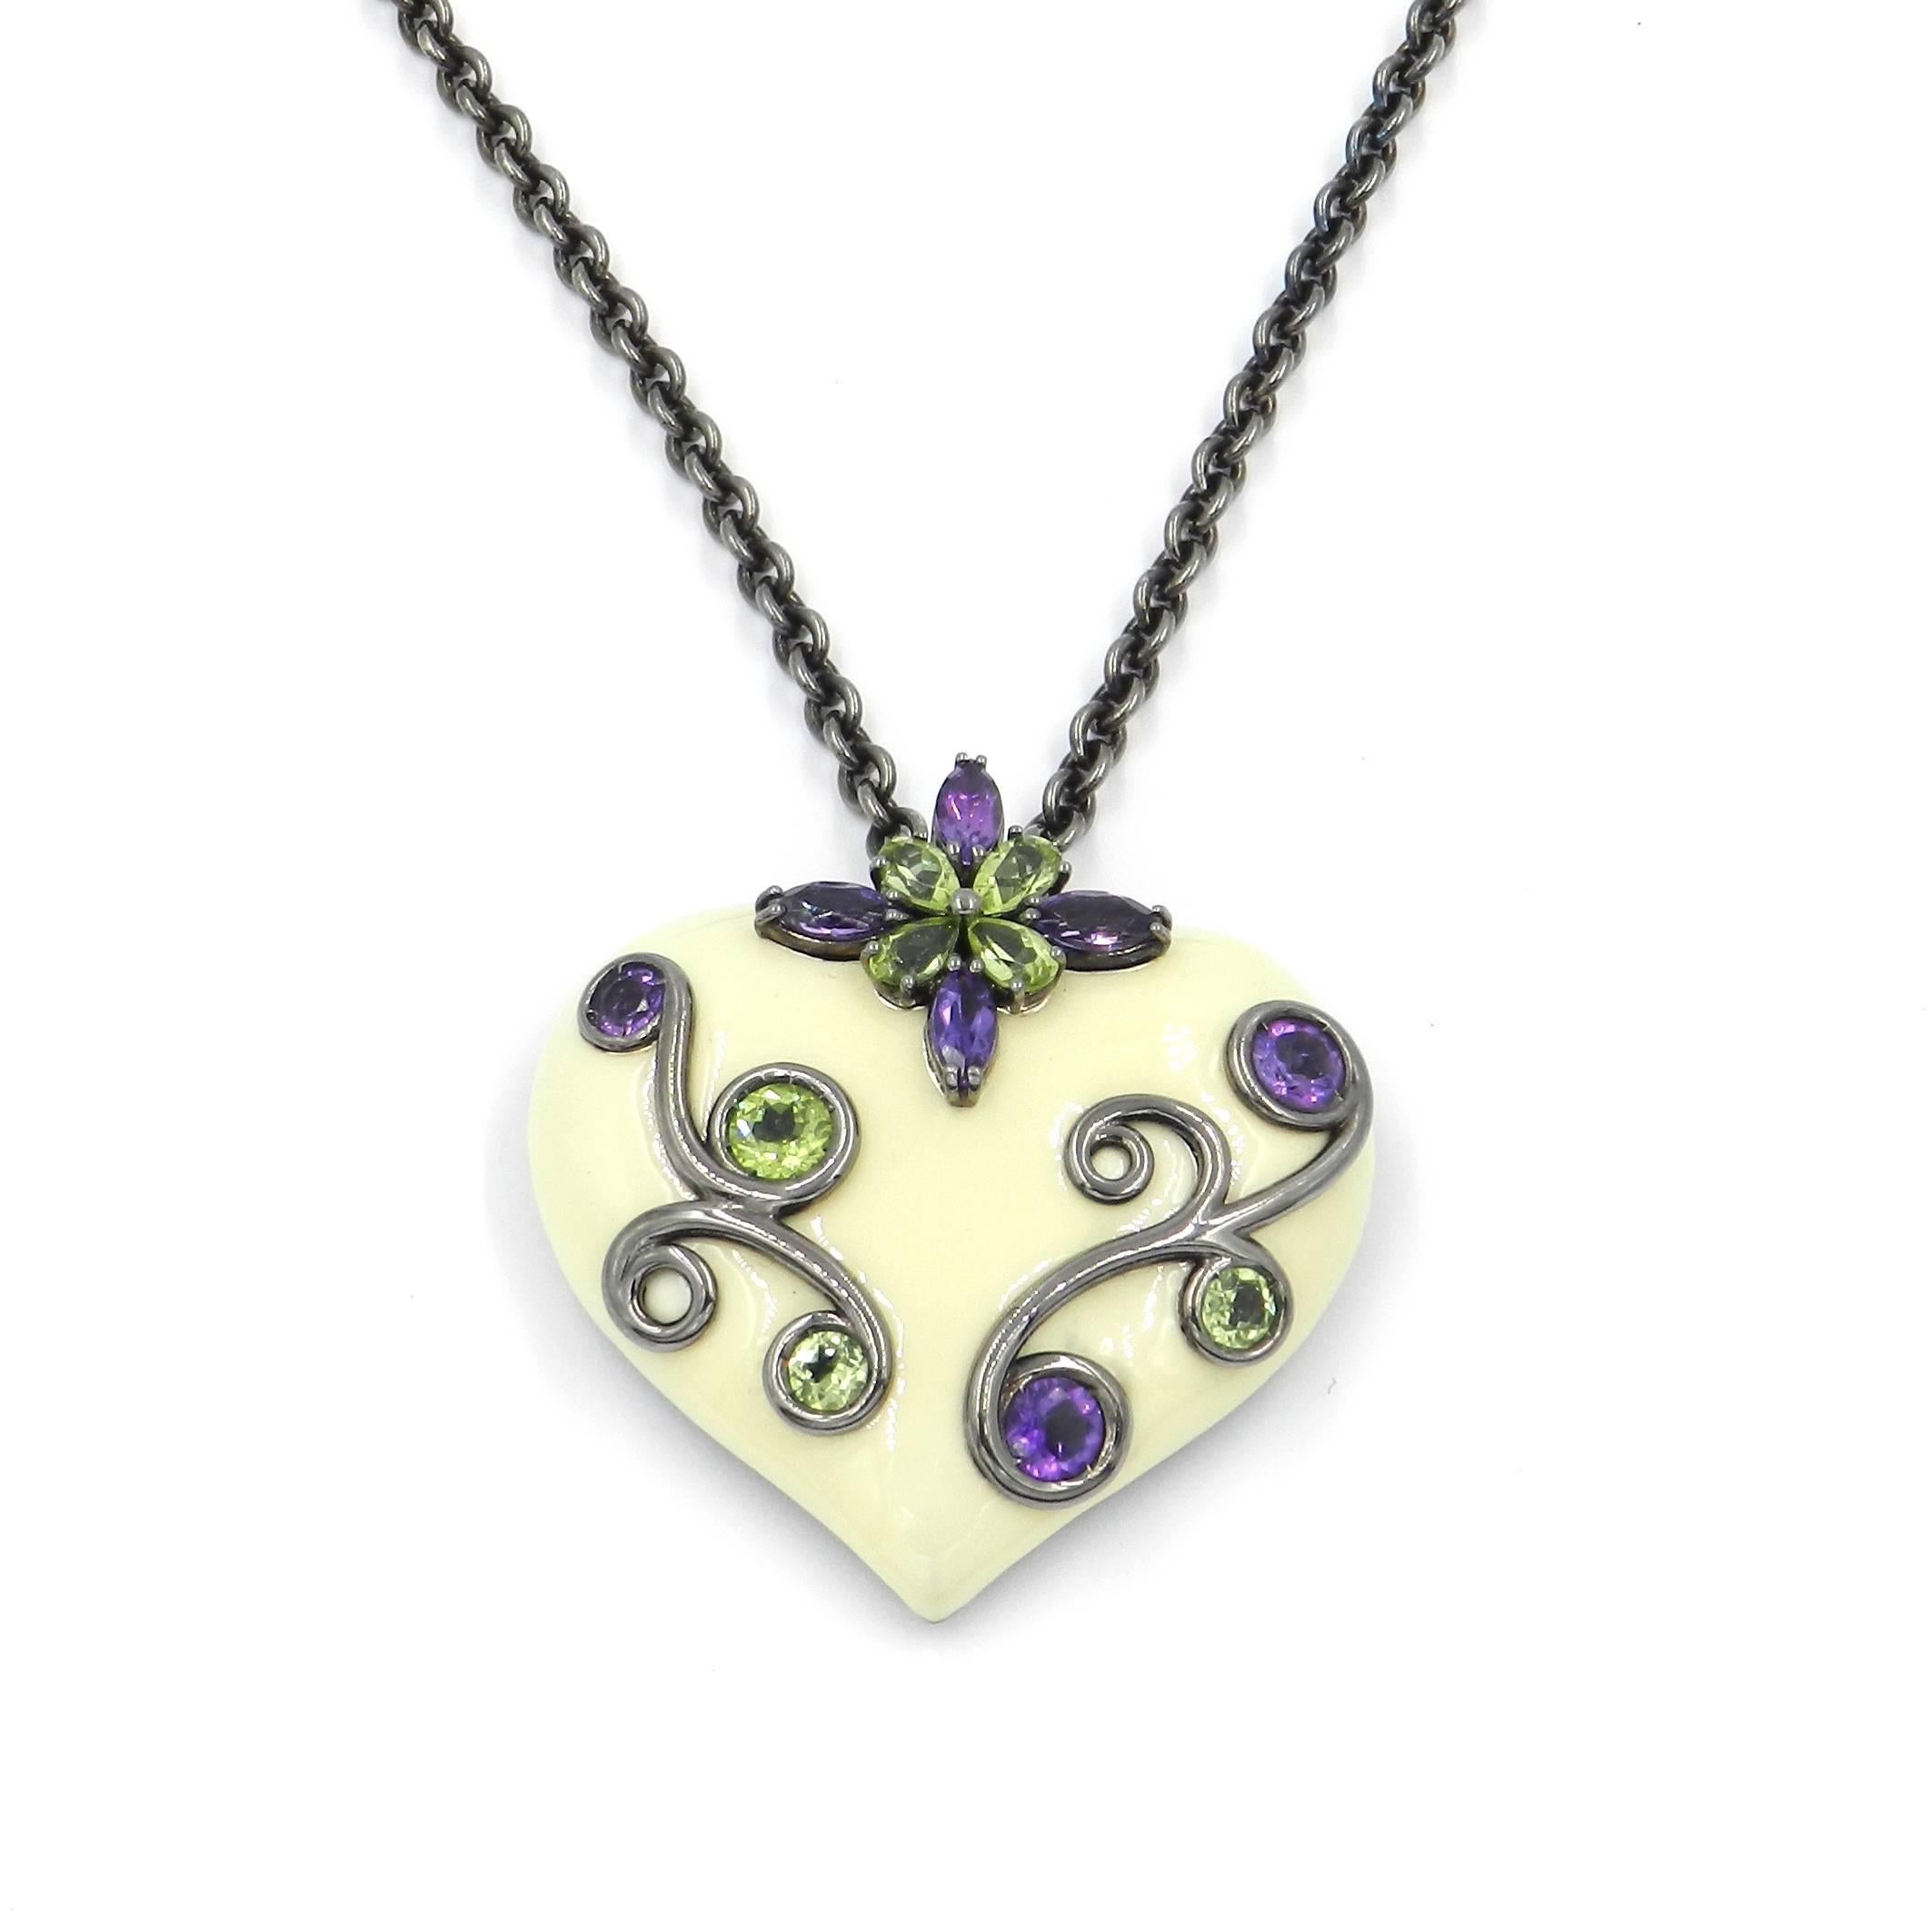 Originally designed across the millenium this fabulous chain with pendant is in silver and features a total of carat 1.60 of peridot and amethyst. The pendant size is mm 40 X 35. The chain lenght is 50 cm. Handcrafted in Italy, from the Garavelli